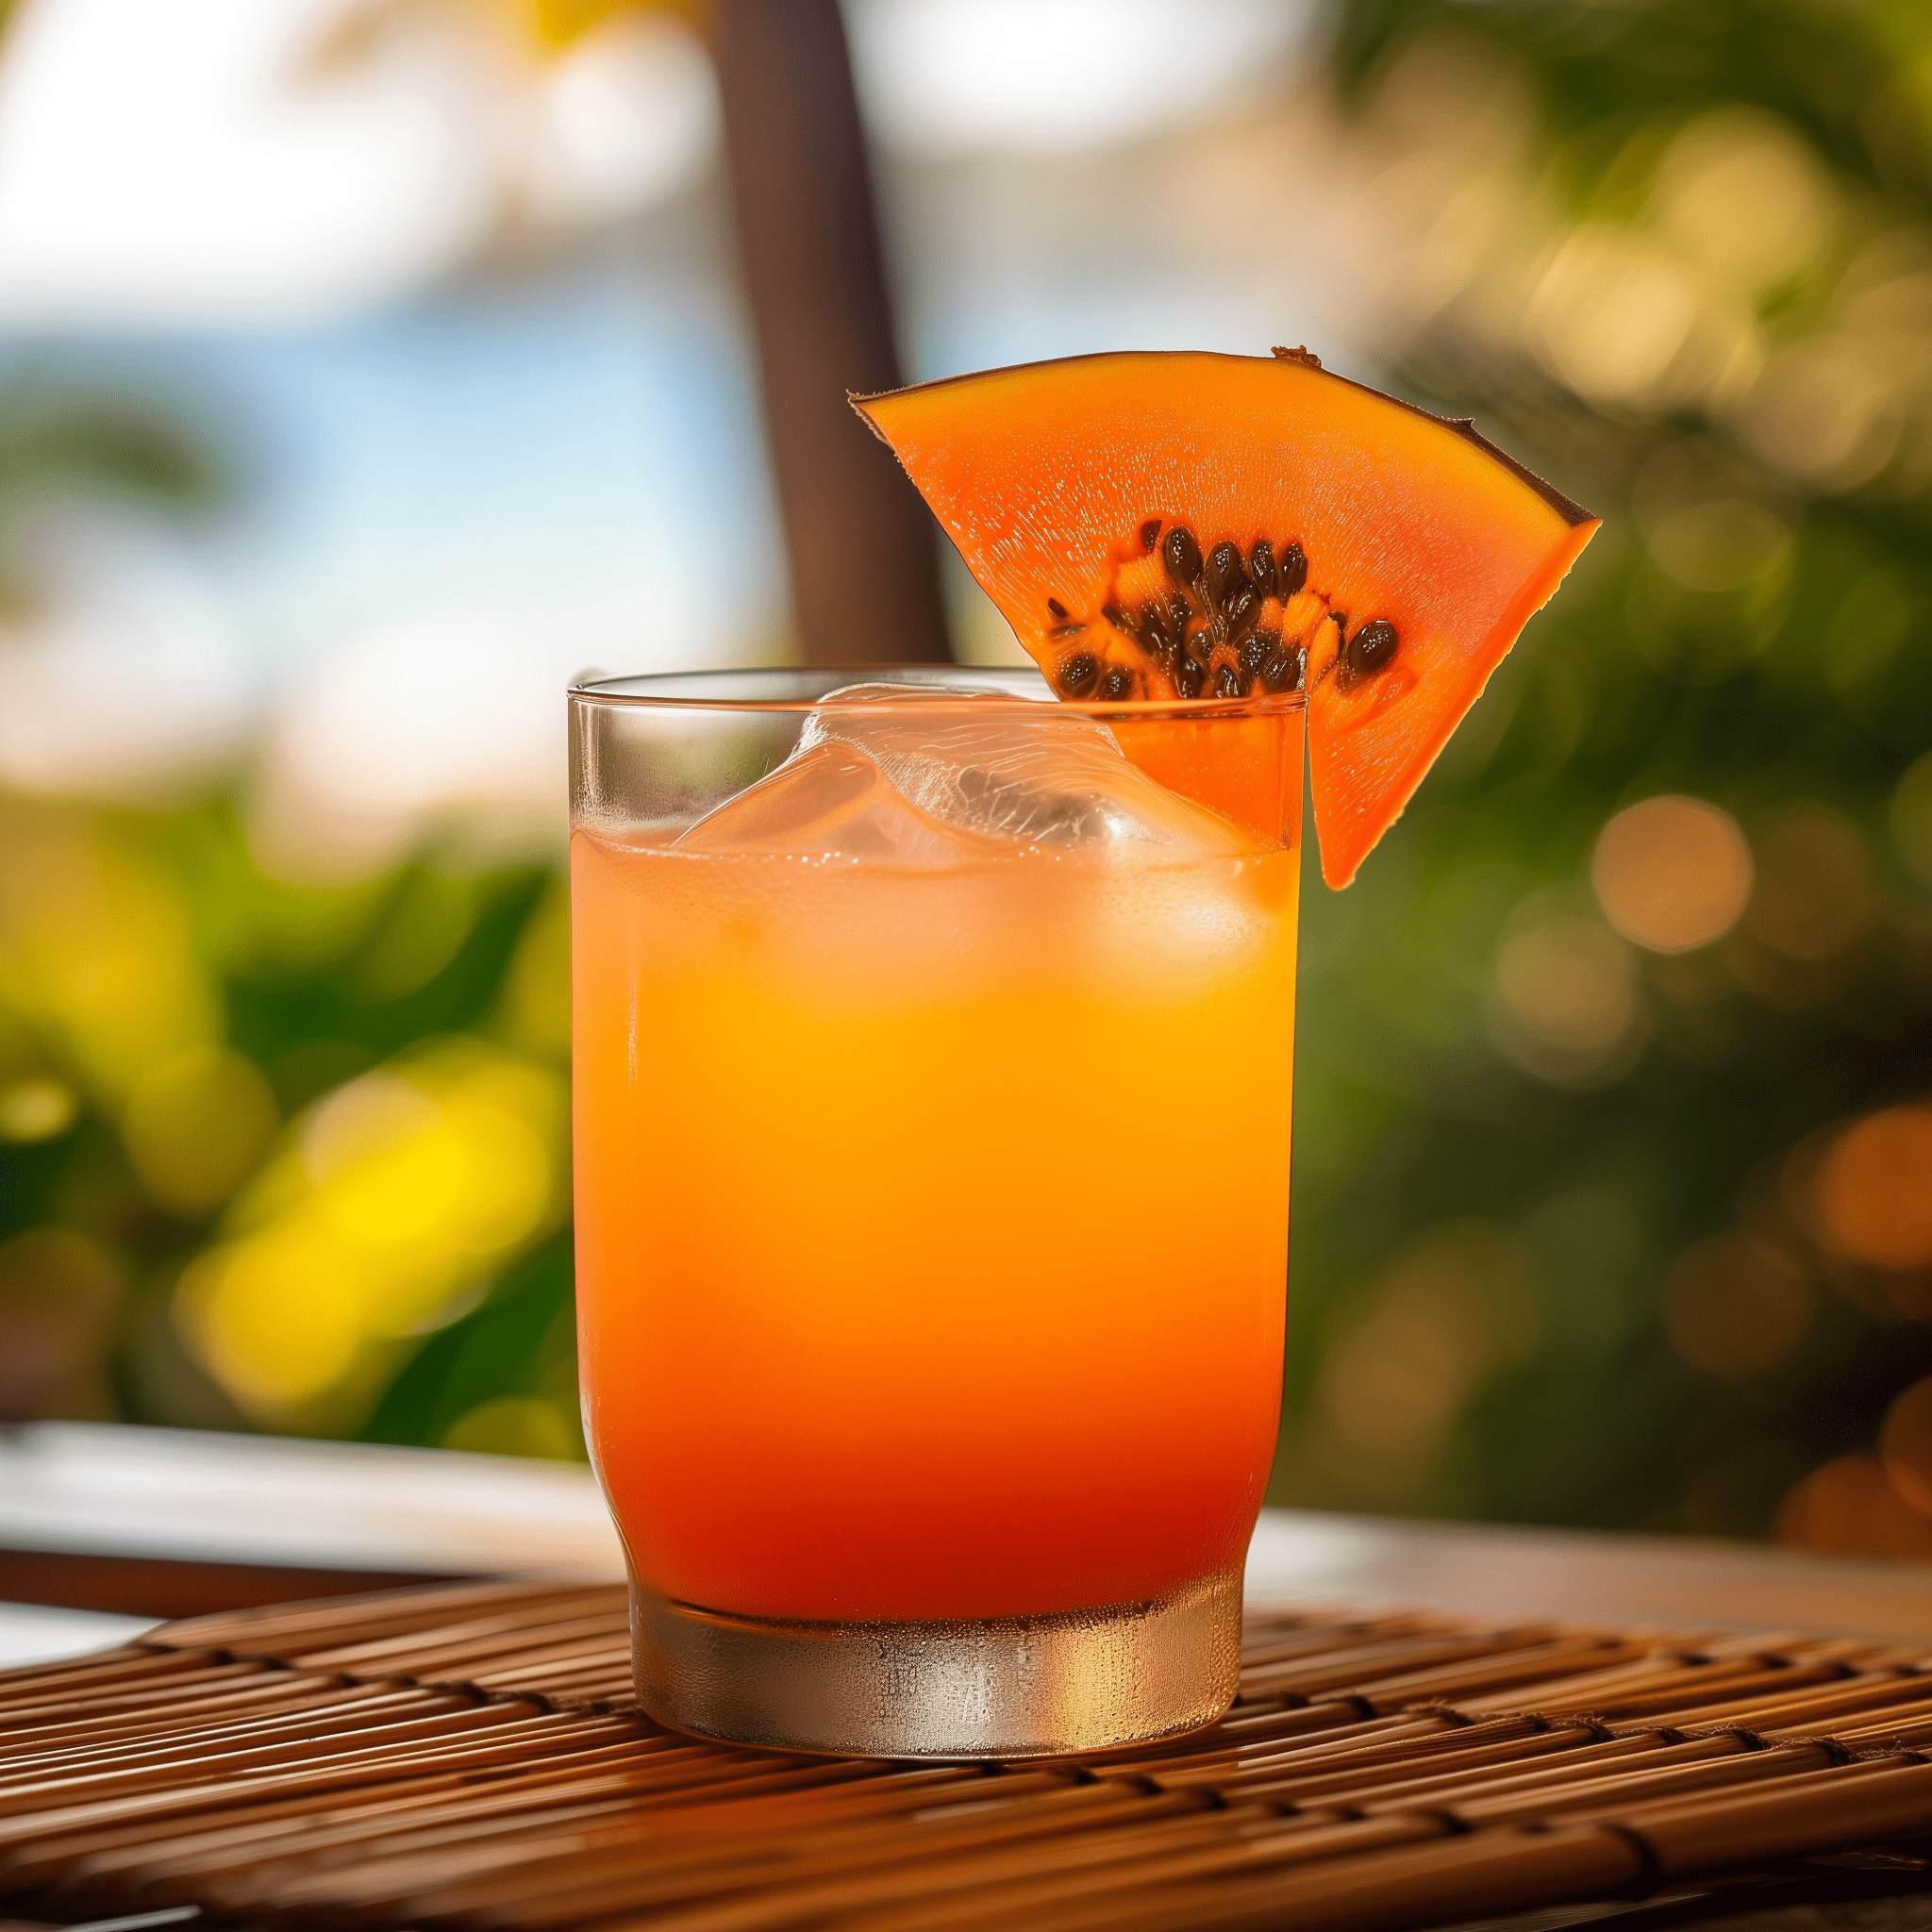 Papaya Smash Cocktail Recipe - The Papaya Smash is a delightful blend of sweet and tangy flavors with a hint of bitterness from the Aperol. The ripe papaya lends a lush, tropical sweetness that is perfectly complemented by the rich, oaky notes of the añejo tequila. The lime and orange juices add a refreshing citrus zing, making it a well-rounded and invigorating cocktail.